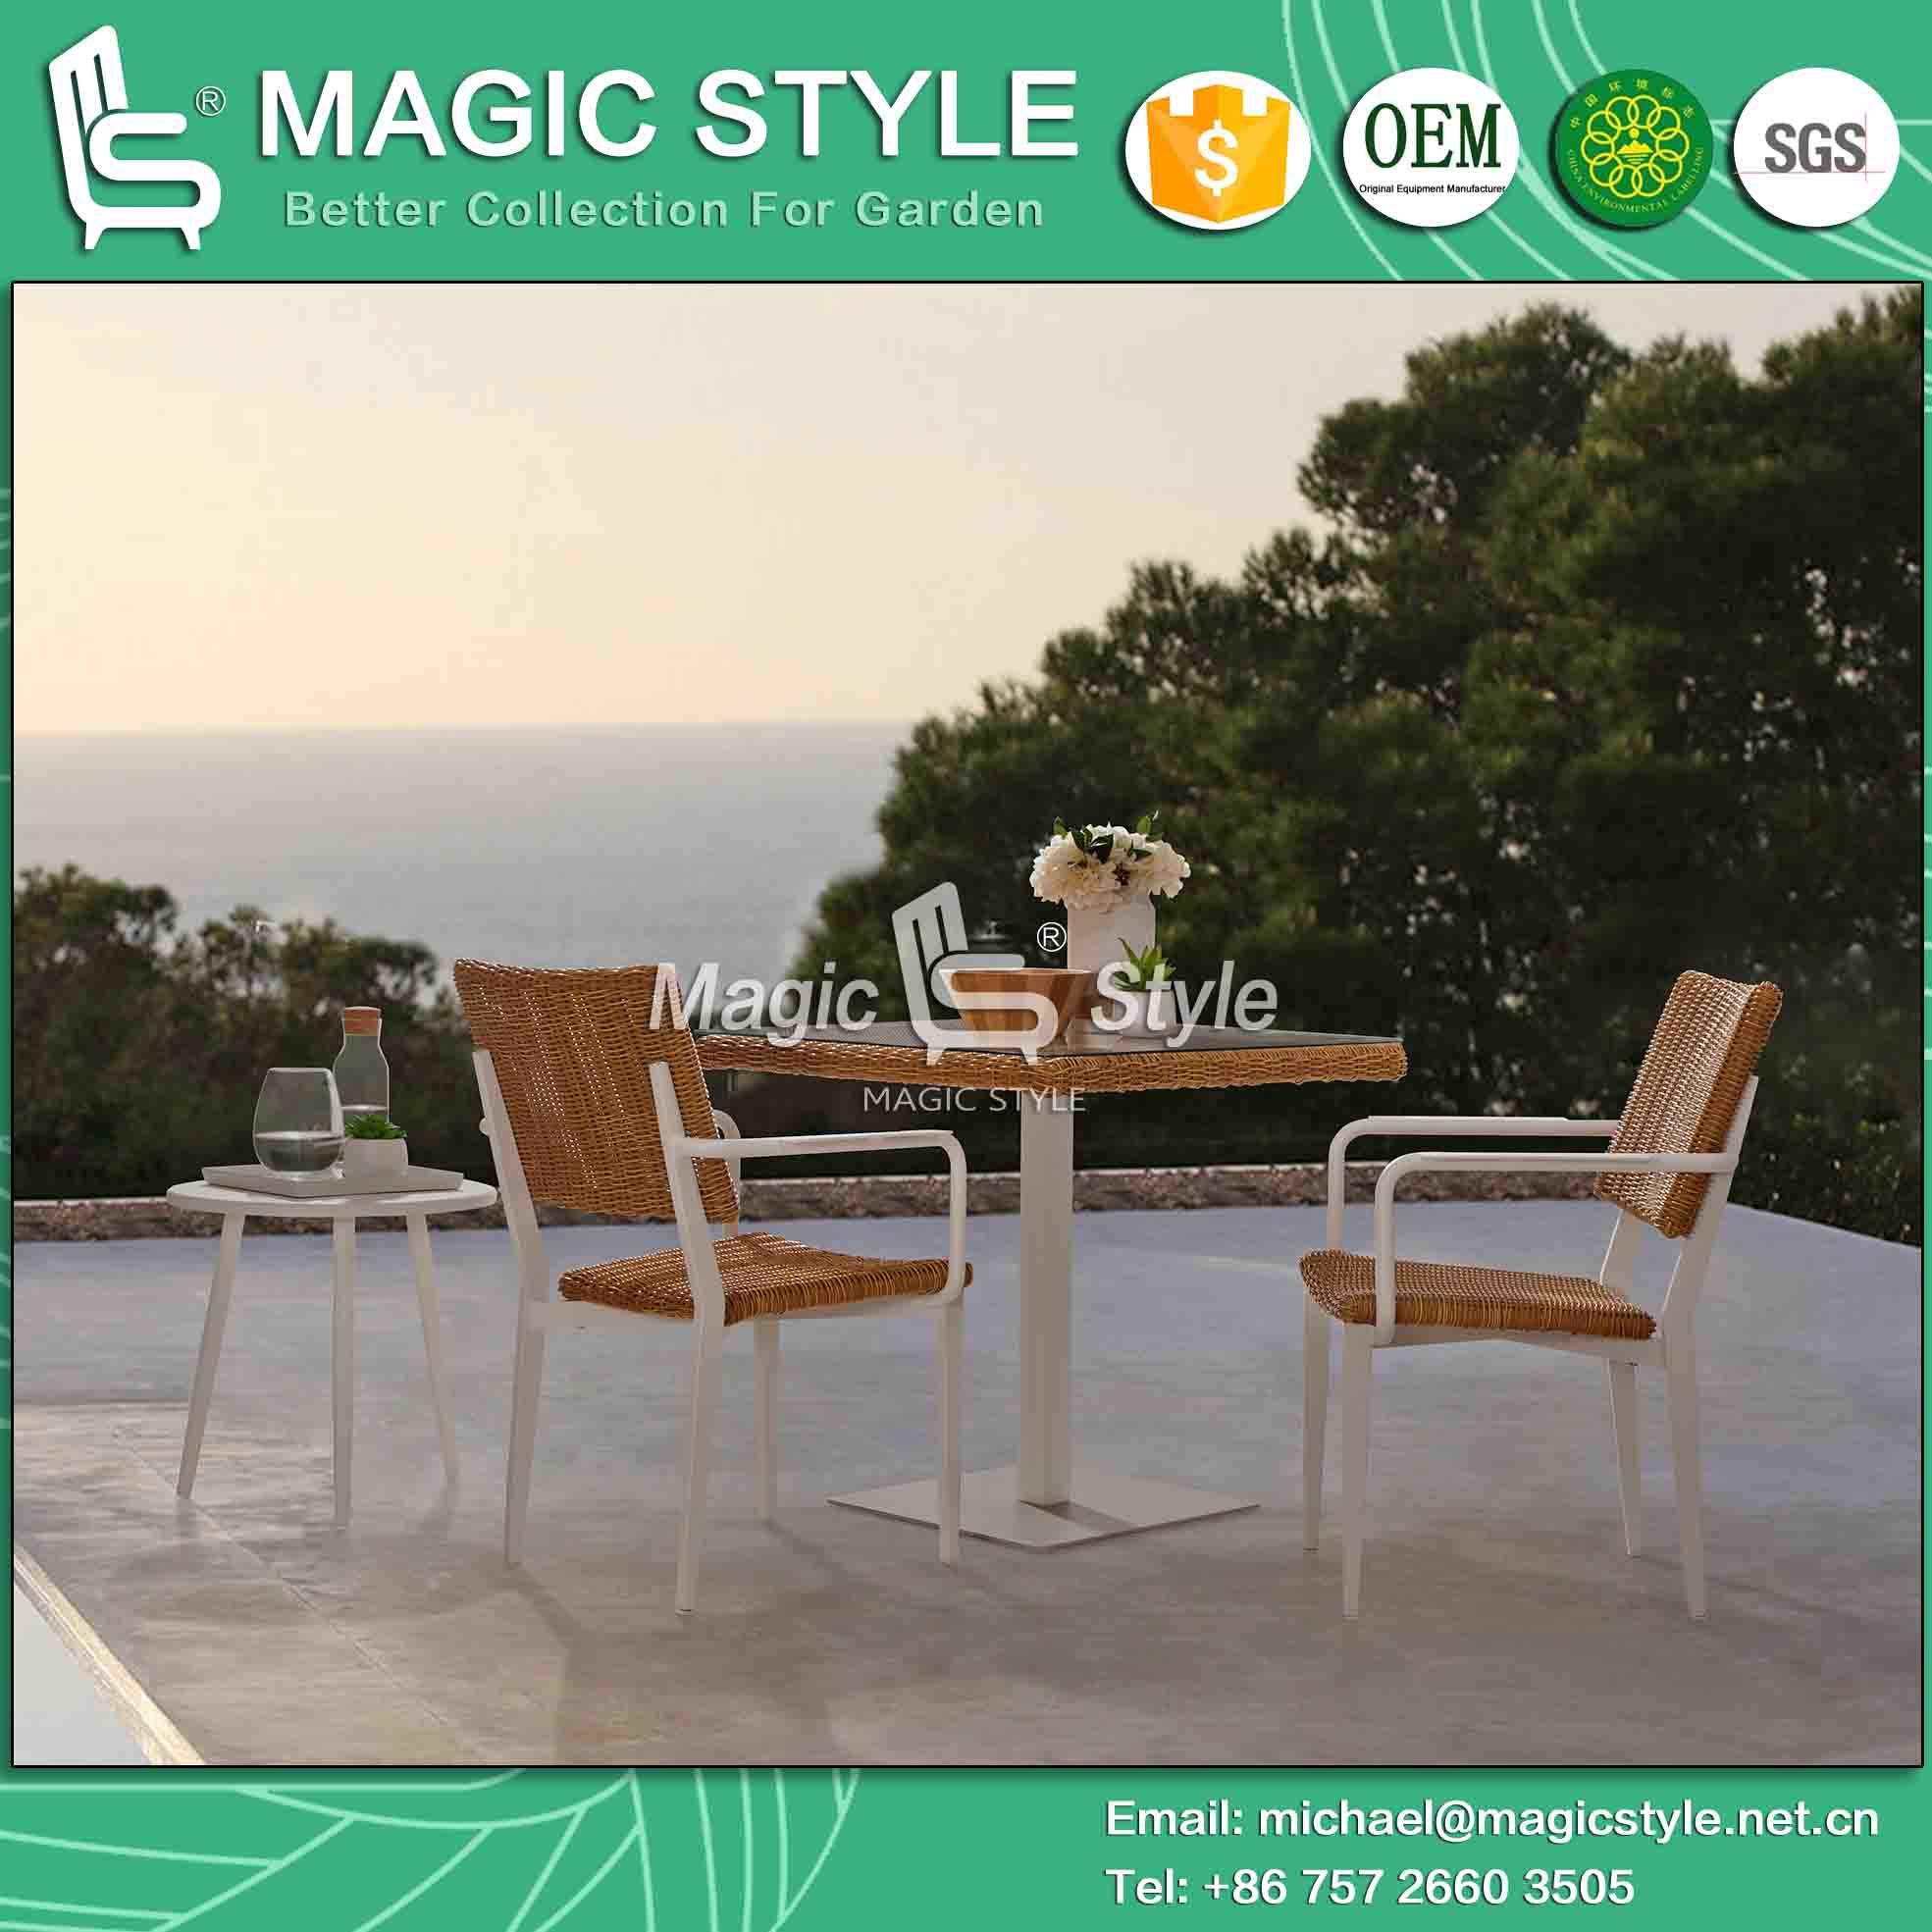 Outdoor Wicker Dining Set Patio Dining Chair Aluminum Dining Set Garden Rattan Dining Table Wicker Square Table Rattan Weaving Coffee Set